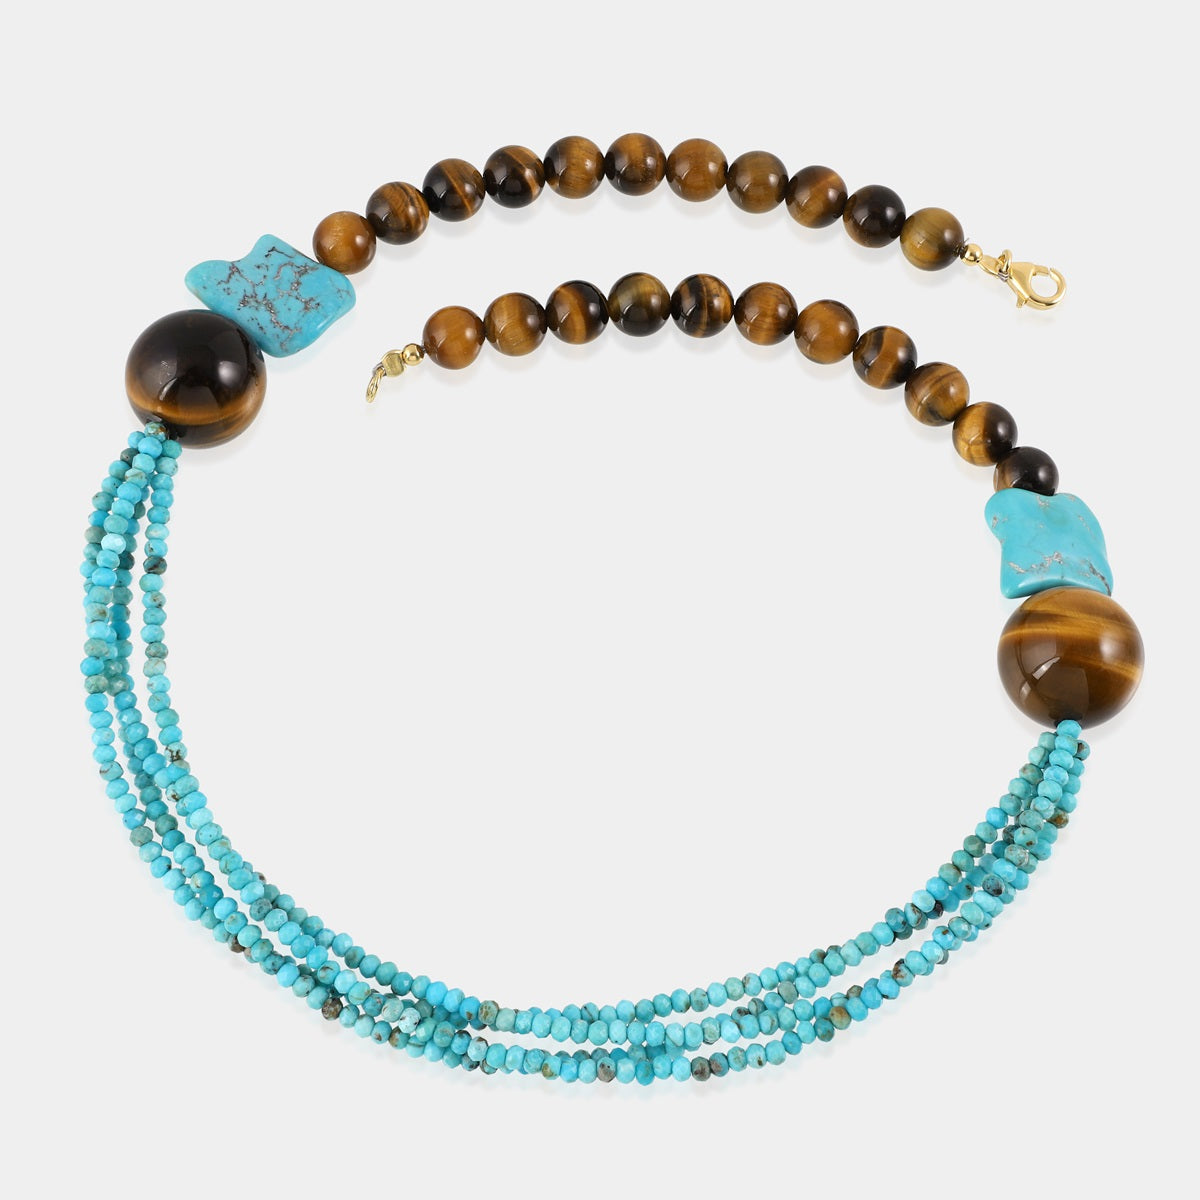 Unique Design featuring Free-Size Turquoise Slices for a Distinctive Look